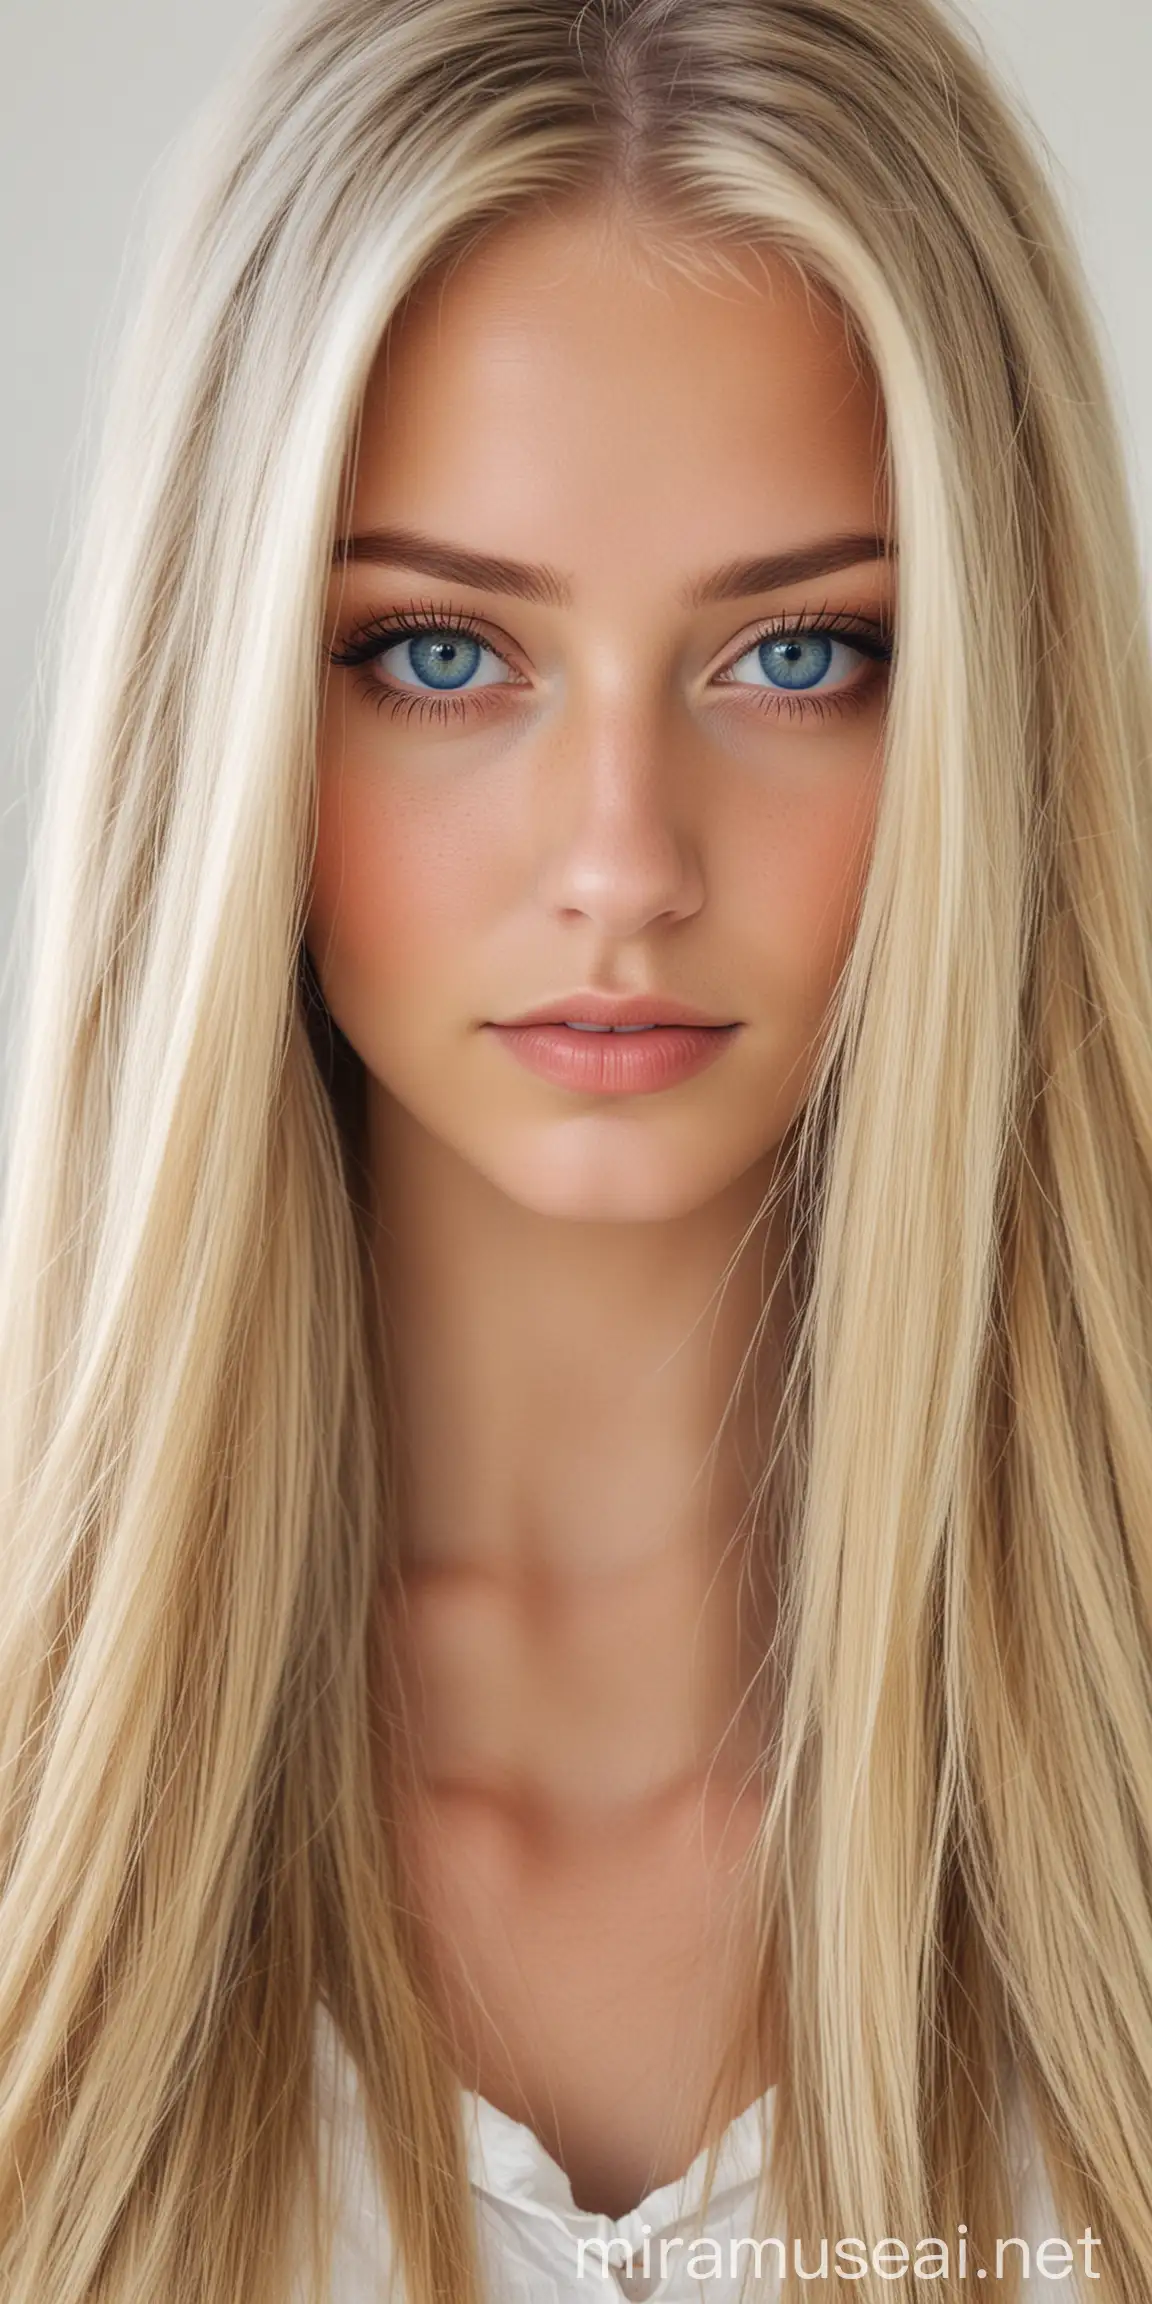 Blonde Woman with Blue Eyes and Long Hair Portrait